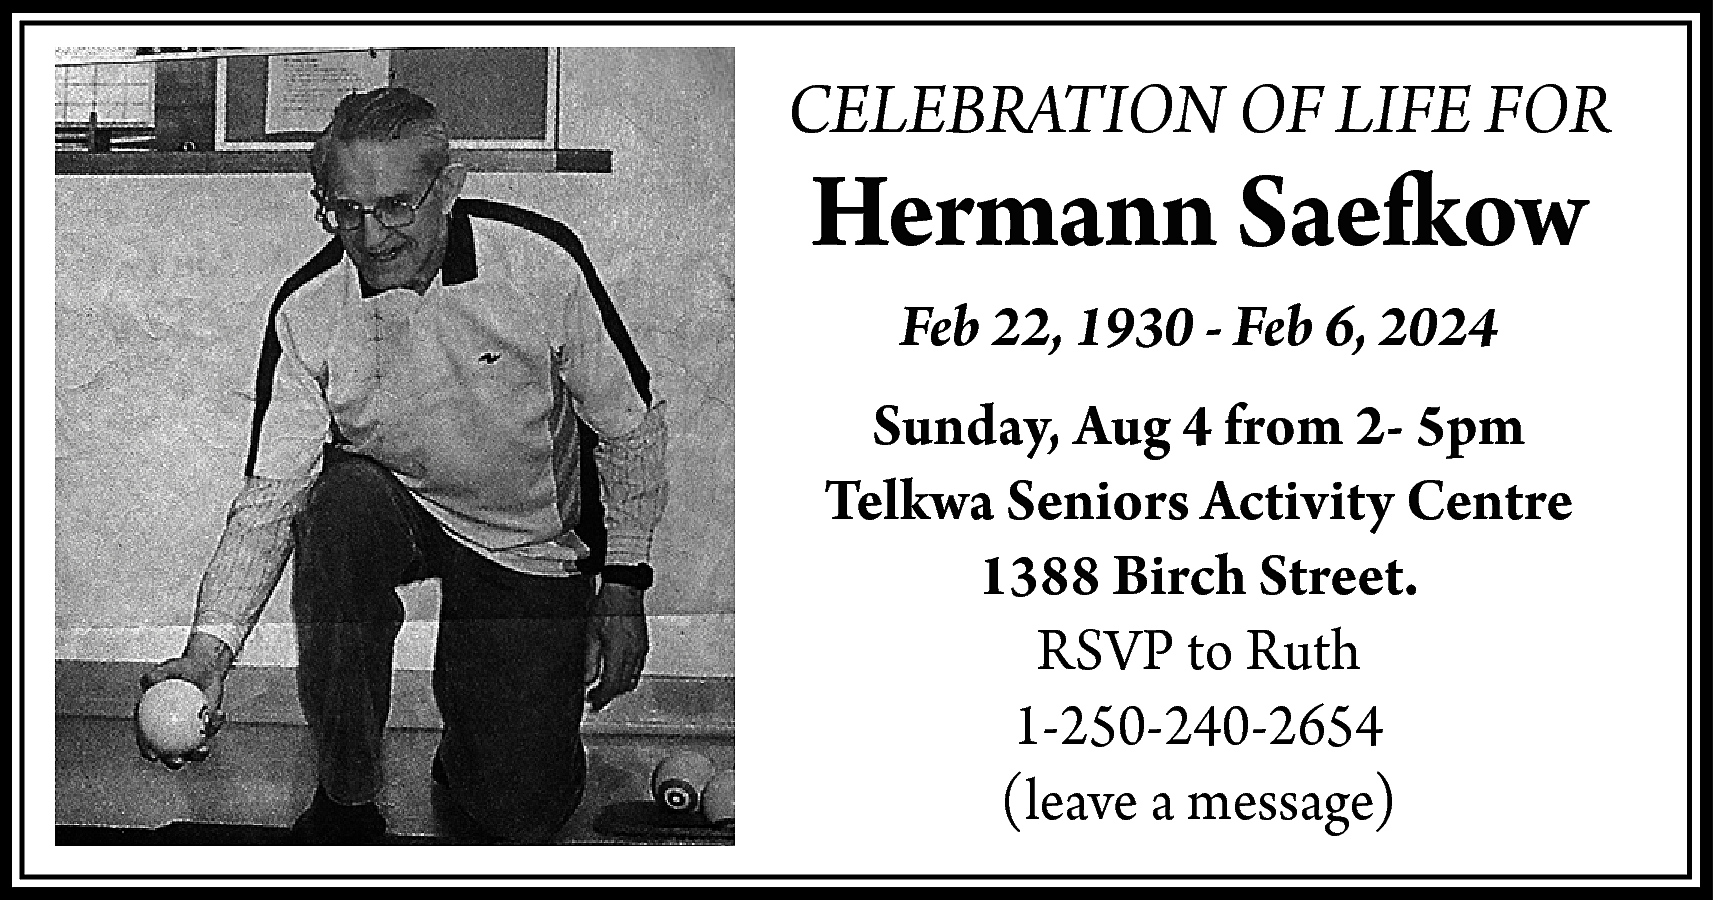 CELEBRATION OF LIFE FOR <br>  CELEBRATION OF LIFE FOR    Hermann Saefkow  Feb 22, 1930 - Feb 6, 2024  Sunday, Aug 4 from 2- 5pm  Telkwa Seniors Activity Centre  1388 Birch Street.  RSVP to Ruth  1-250-240-2654  (leave a message)    